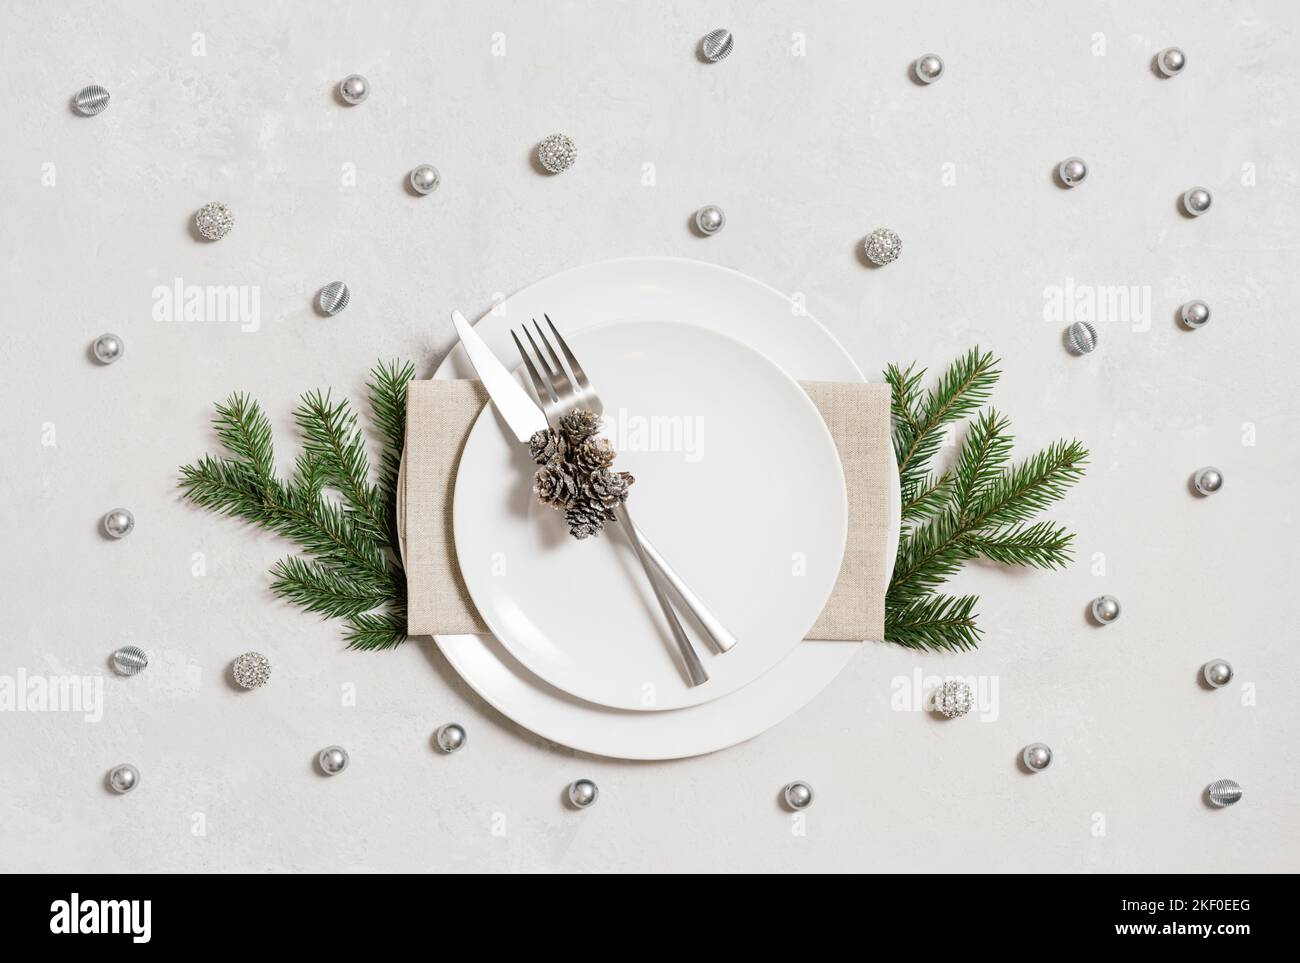 Christmas table setting with silver decorations Stock Photo - Alamy